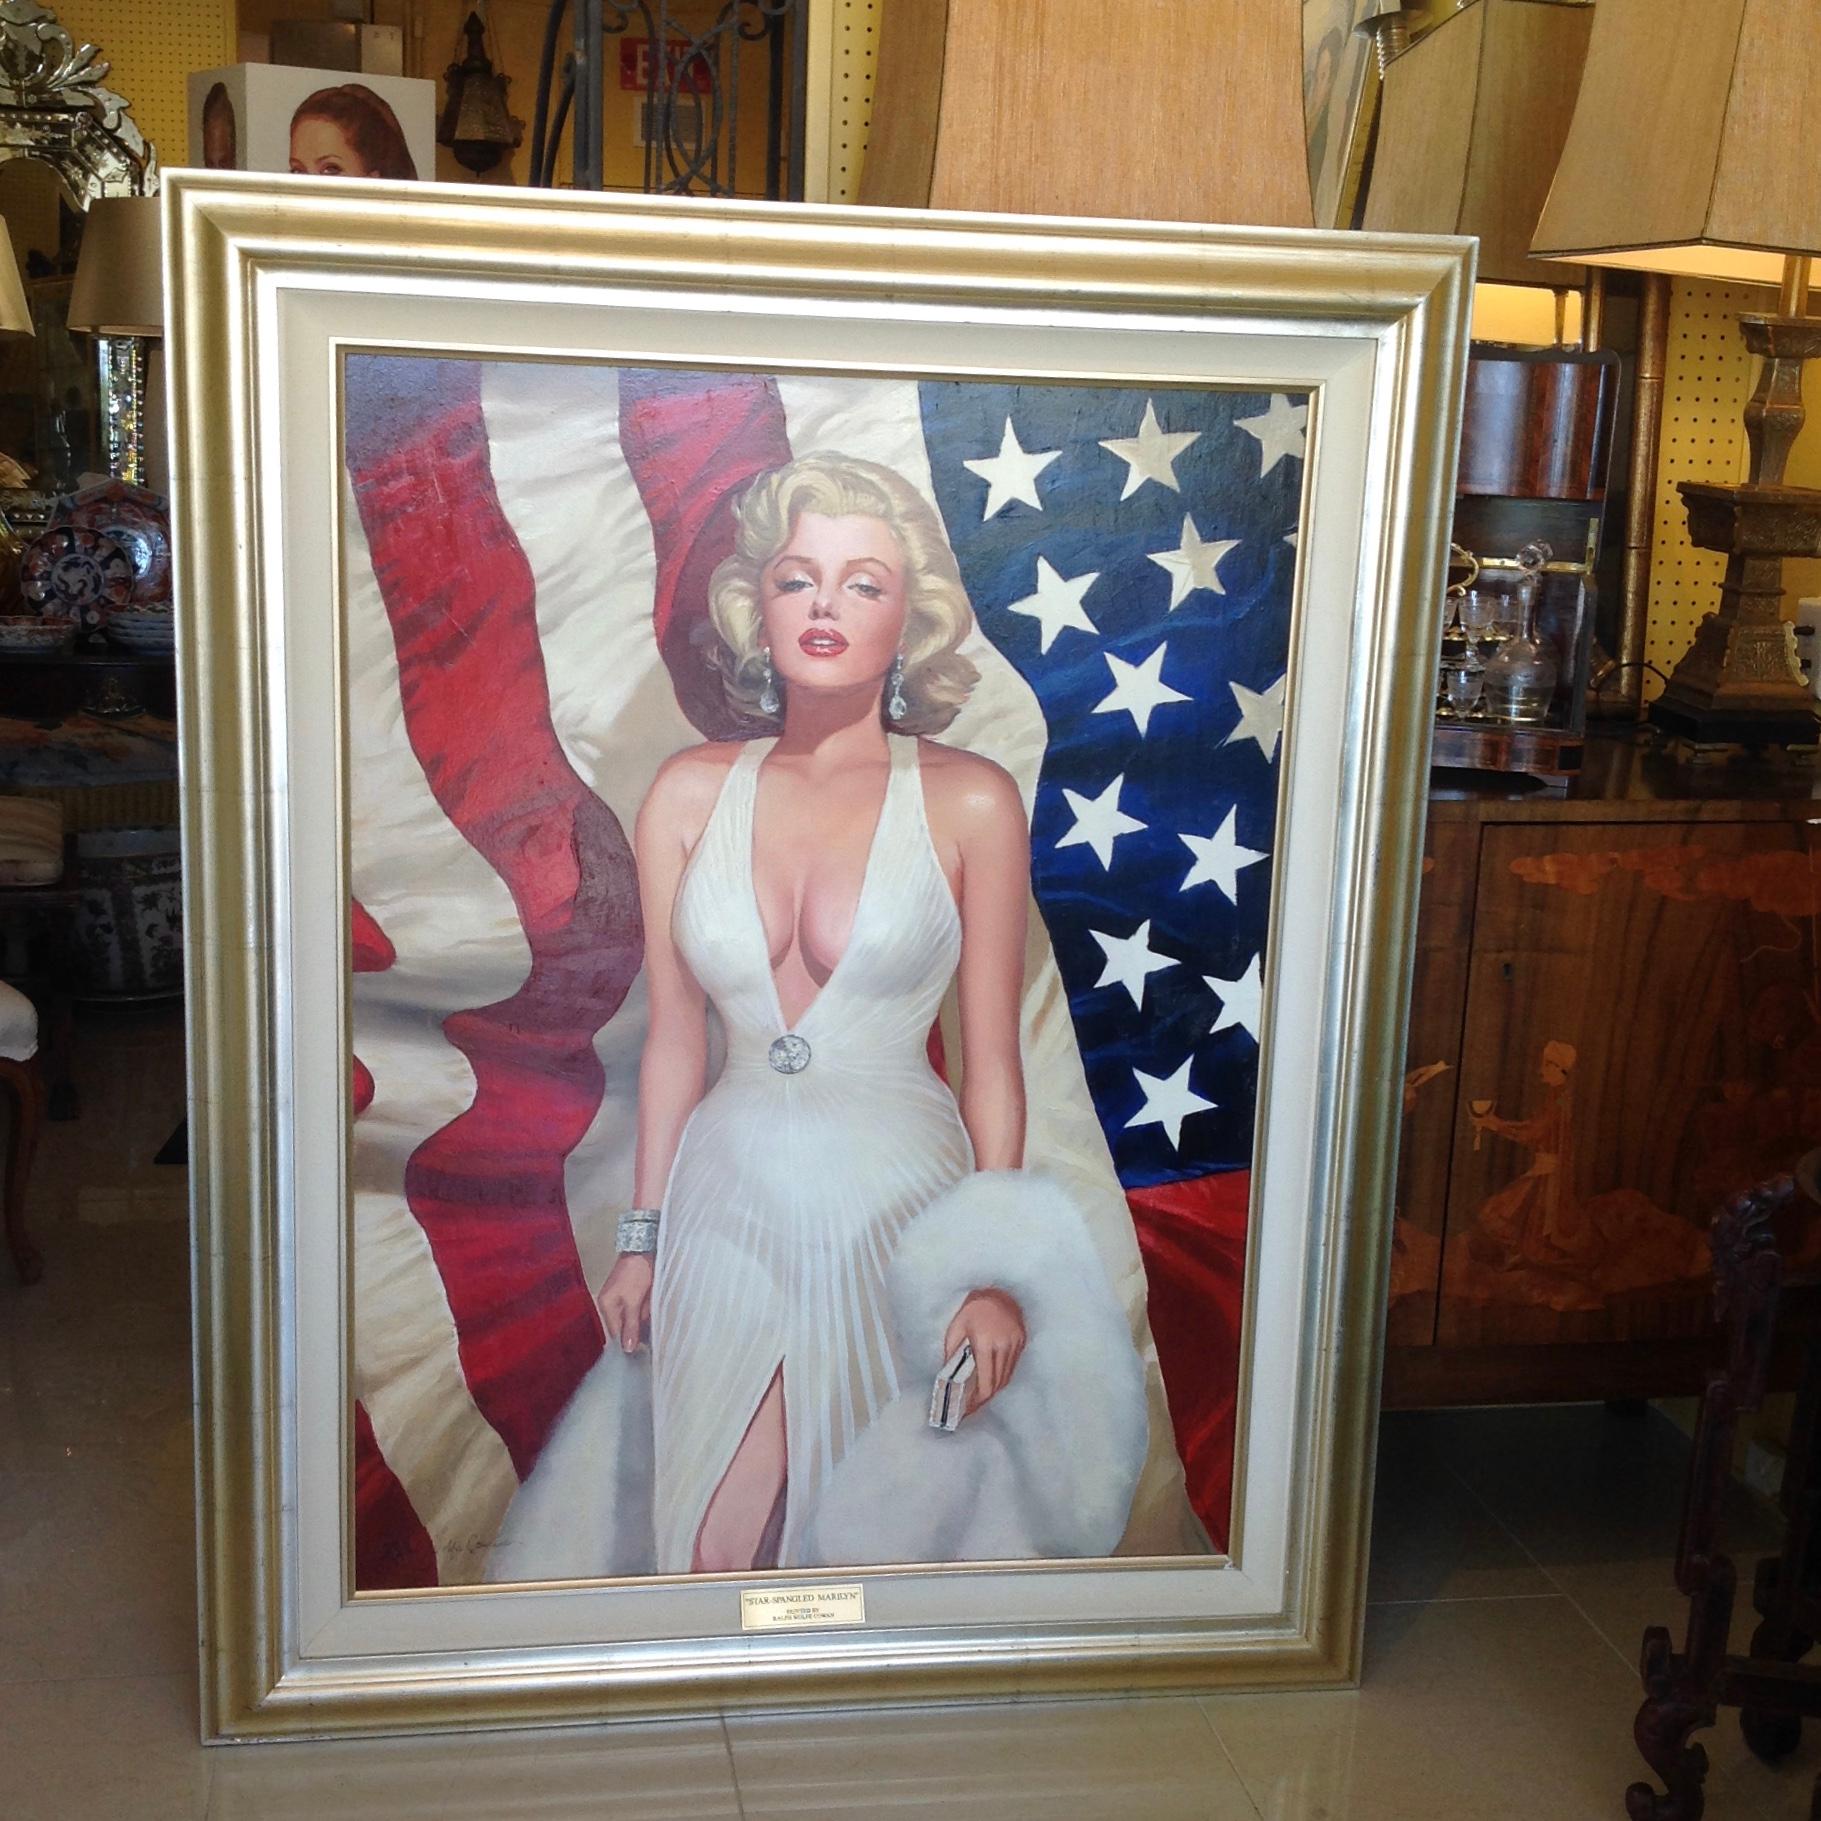 Life-like rendering of the iconic star by the acclaimed artist.
Ralph Cowan met Ms Monroe on 2 occasions on Fire Island and painted
his dramatic rendition from sketches he made of the actress.
Ralph Cowan was the premier portrait artist of the